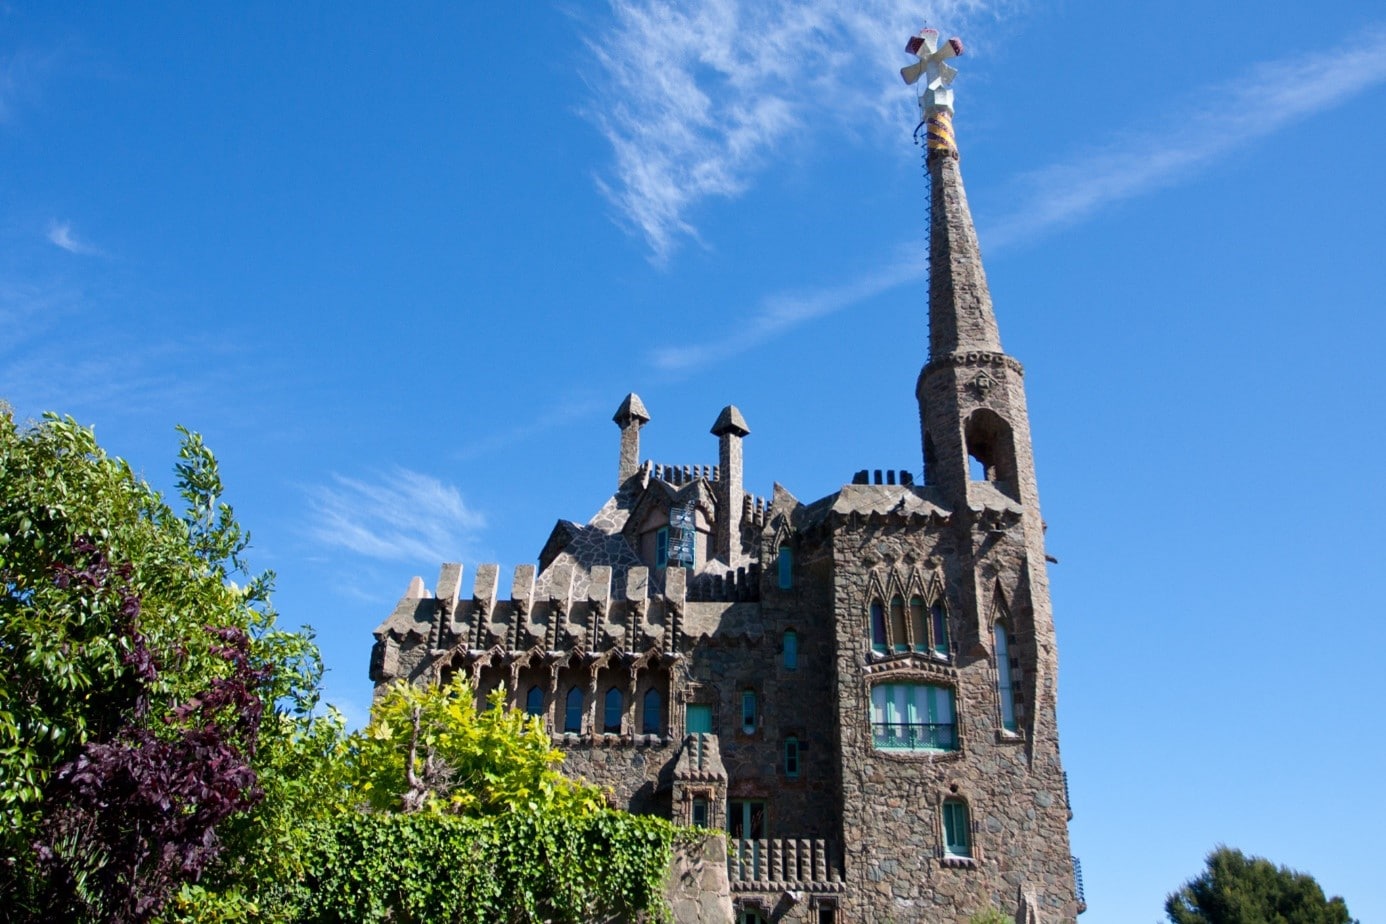 One of the most underrated Gaudí houses is Casa Figueres outside of Barcelona's city centre